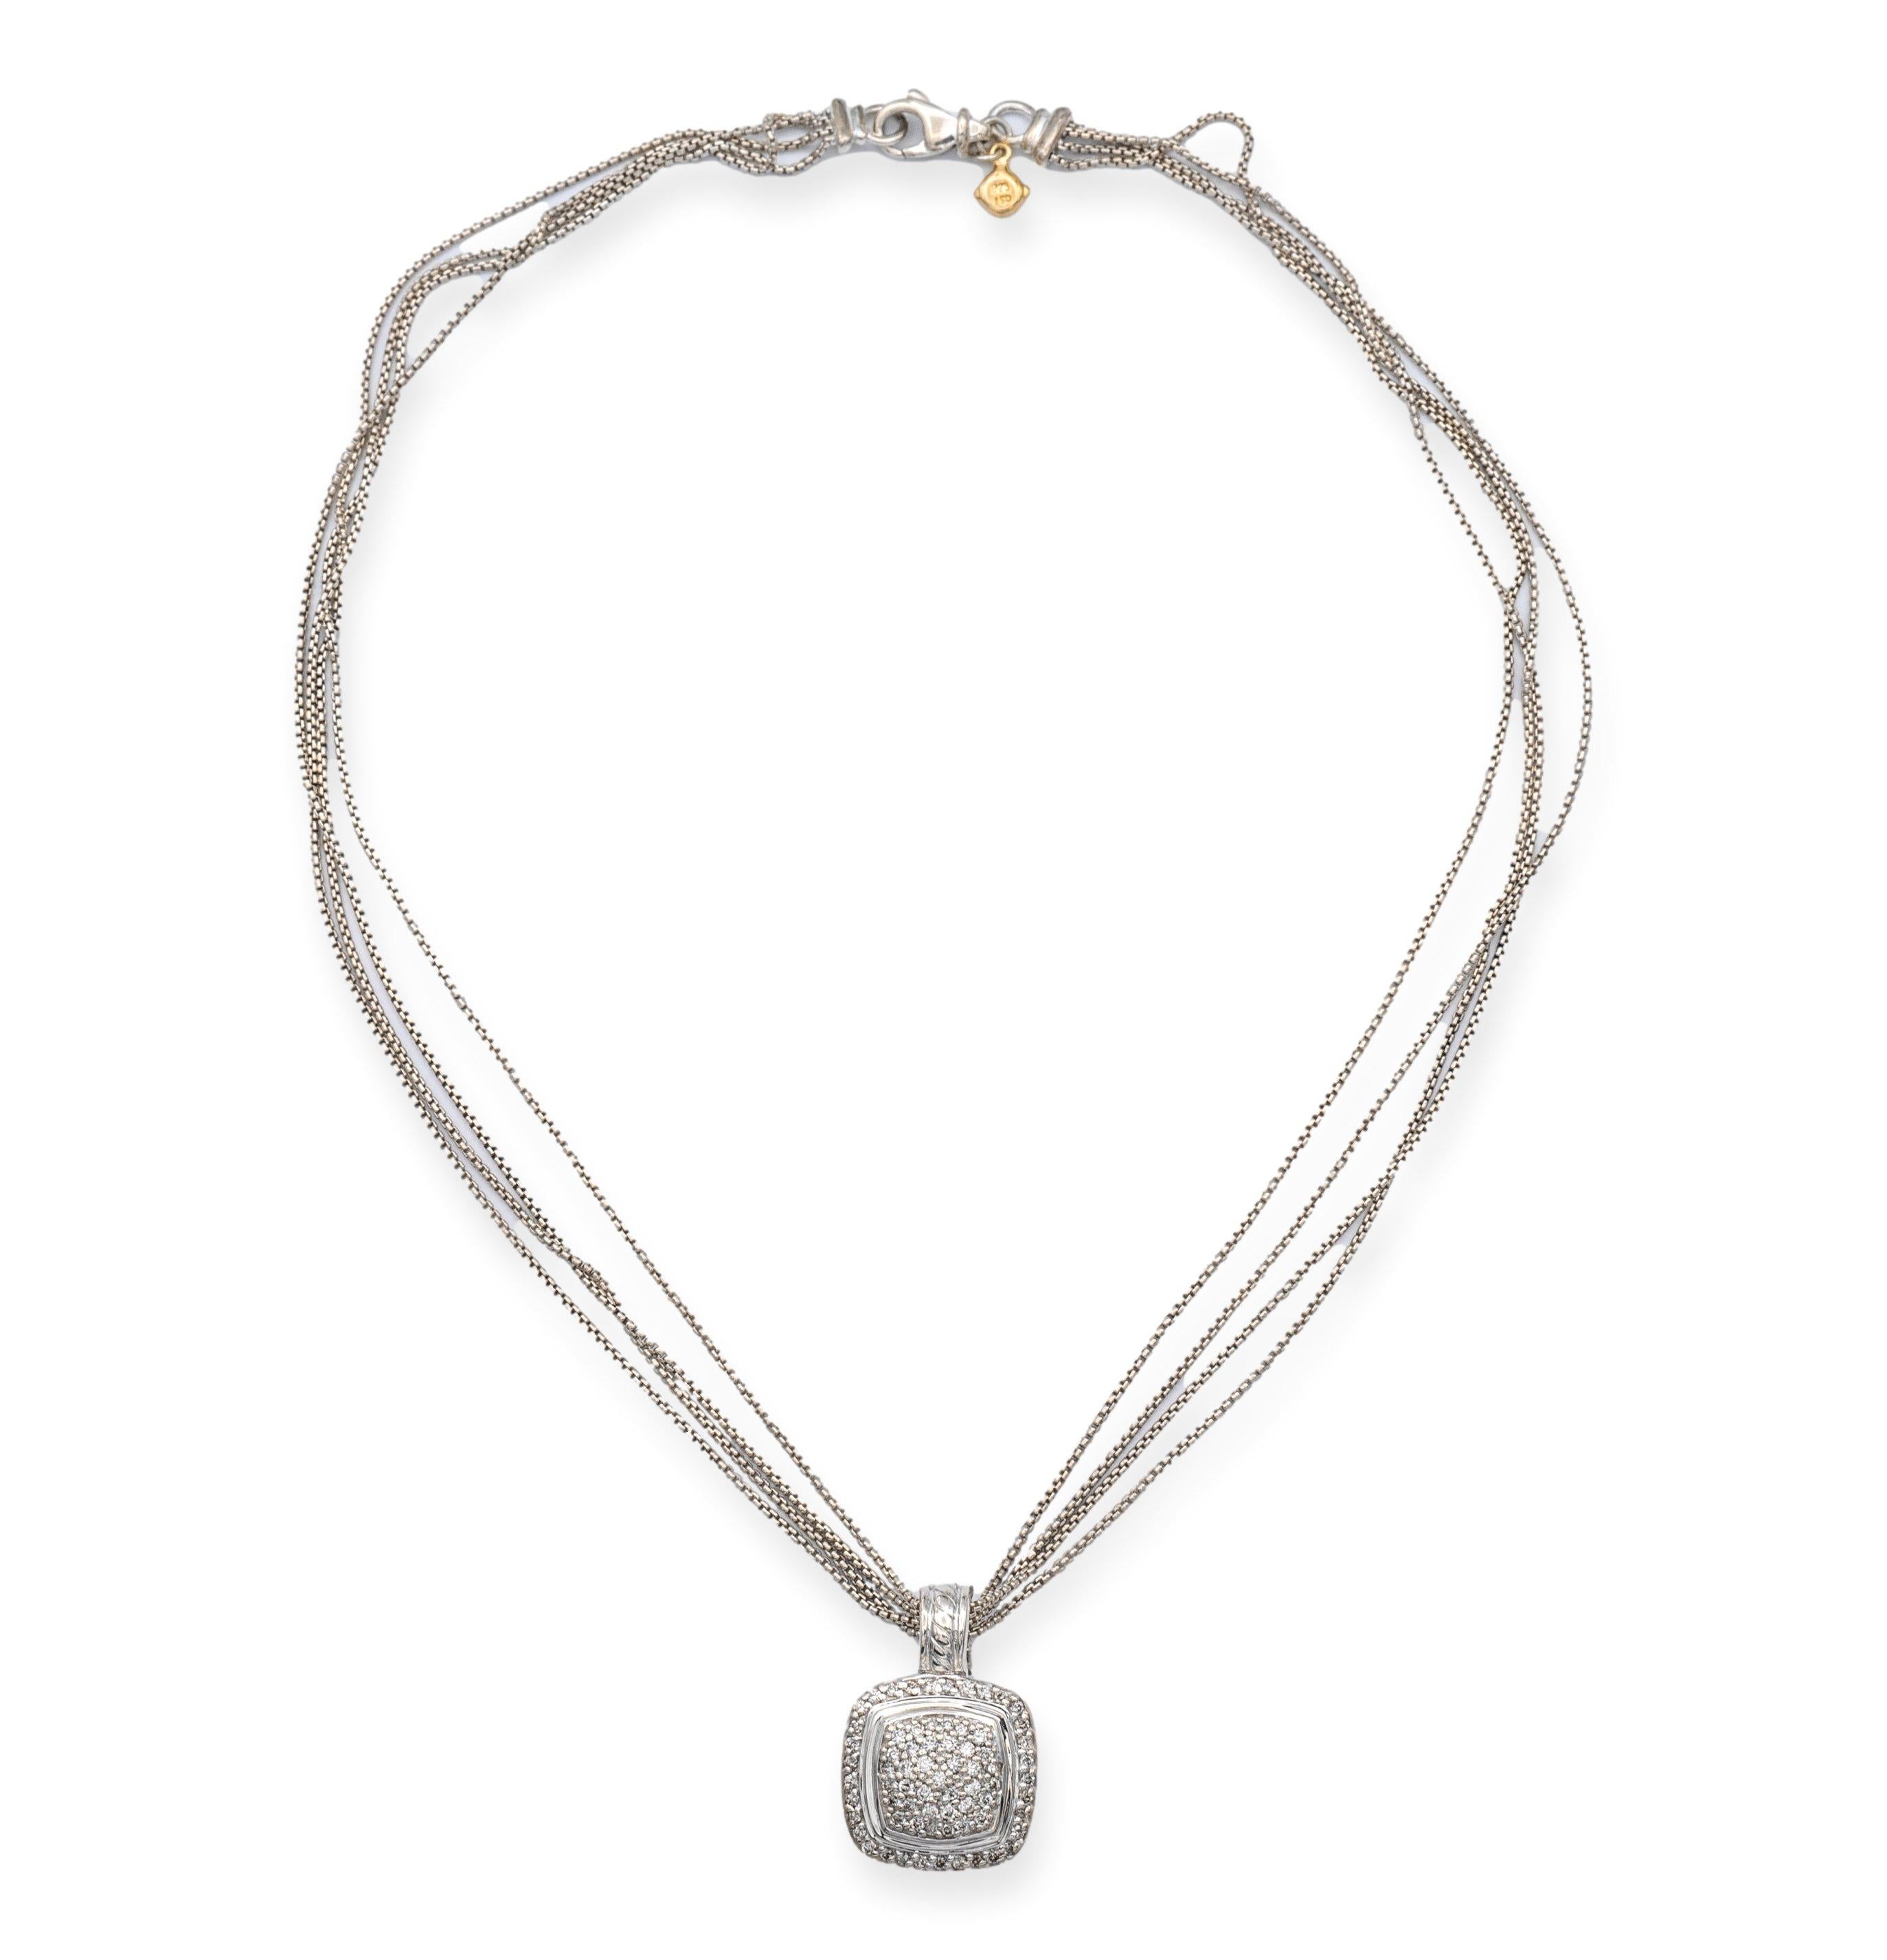 David Yurman is a high-end jewelry brand known for its luxury designs. The Albion Pave Diamond style is a piece from their collection, made of sterling silver with a weight of 14.5 grams and a length of 16 inches. The piece is hallmarked with 